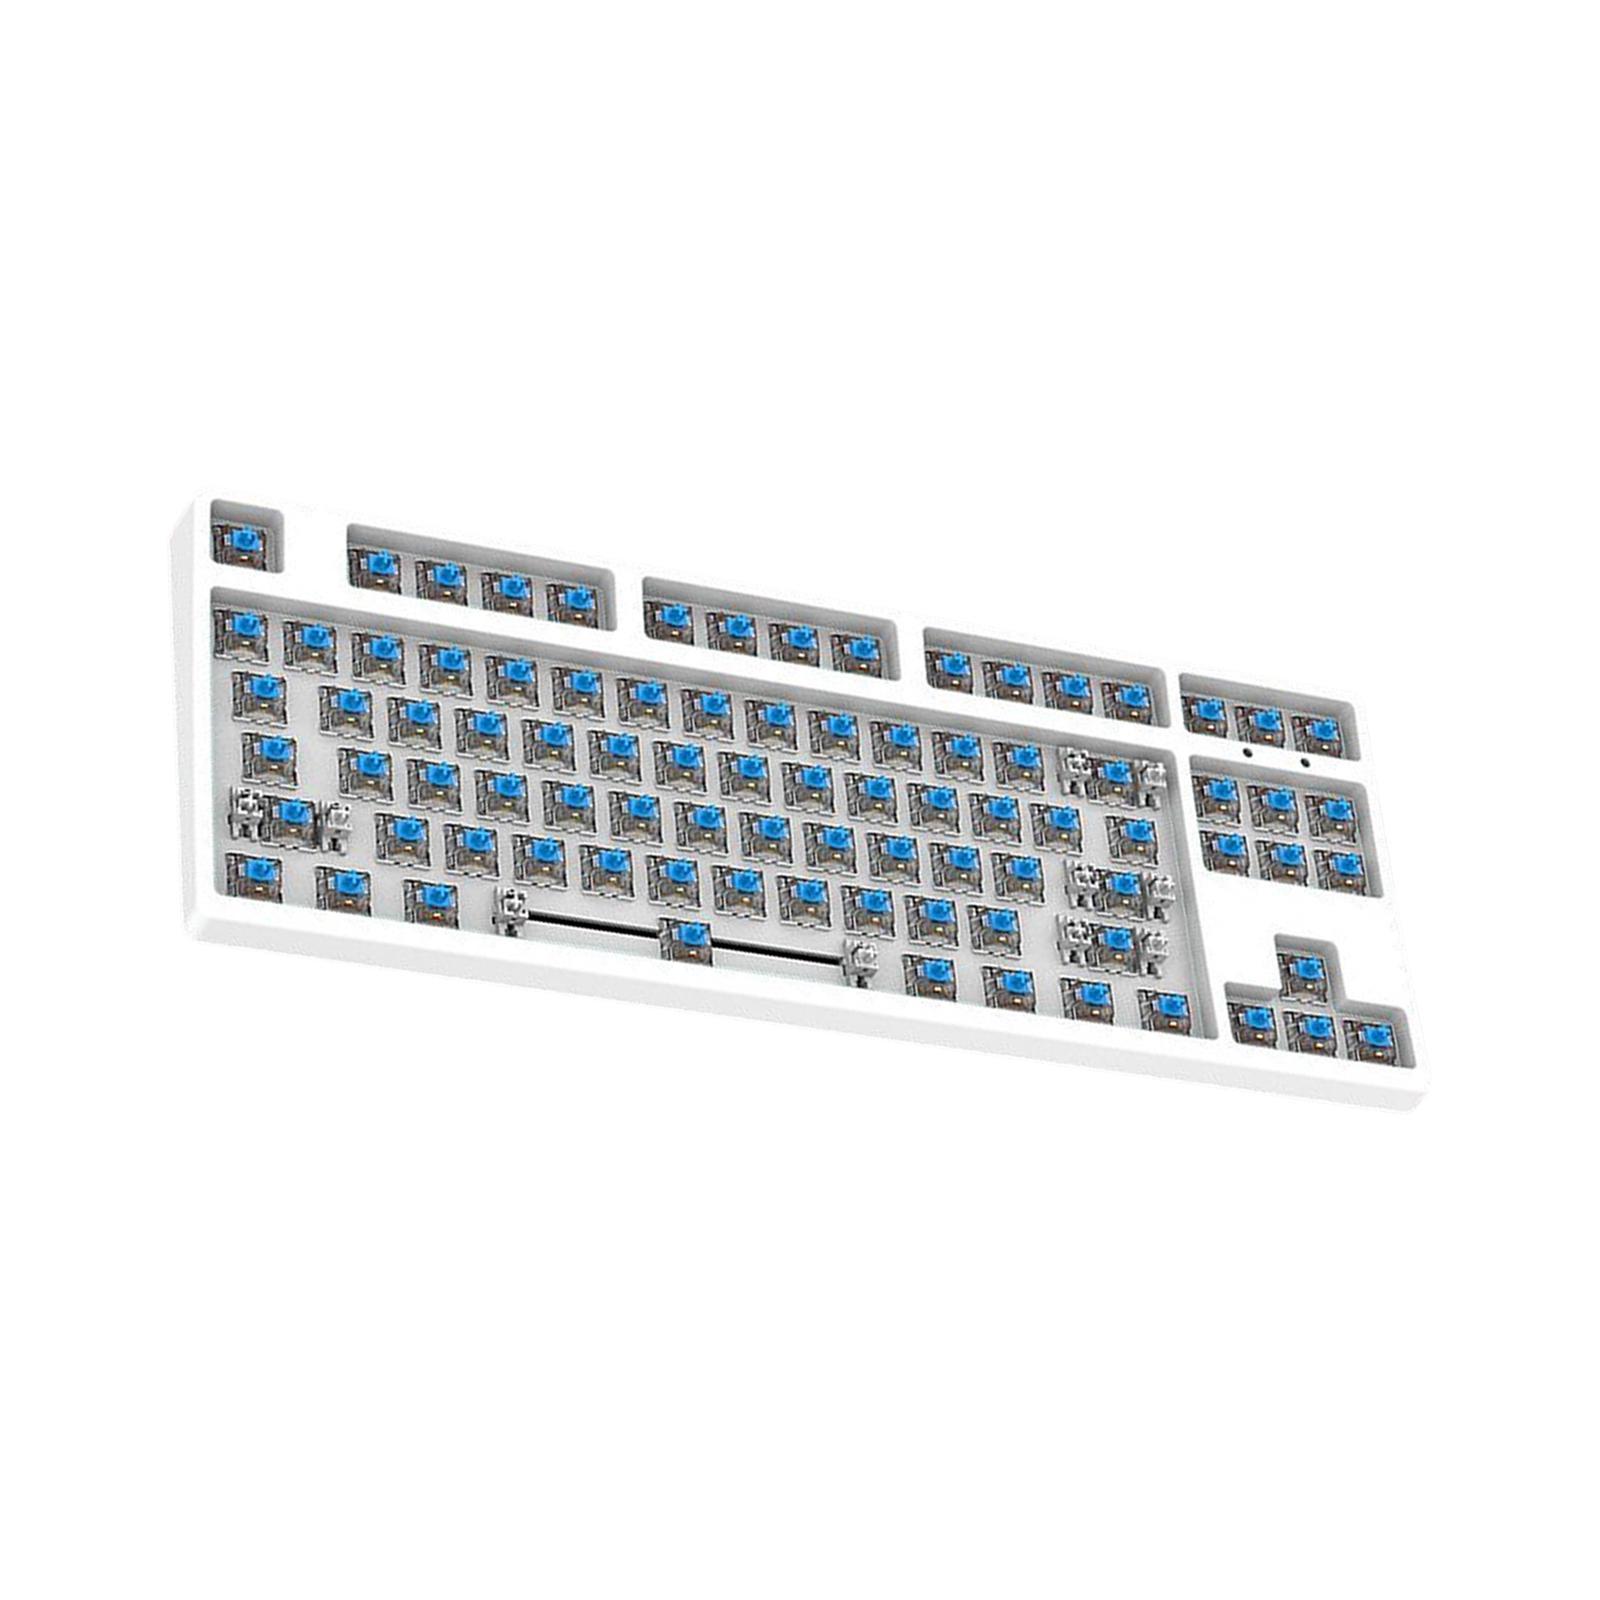 DIY Wired Mechanical Keyboard Kit accessories White